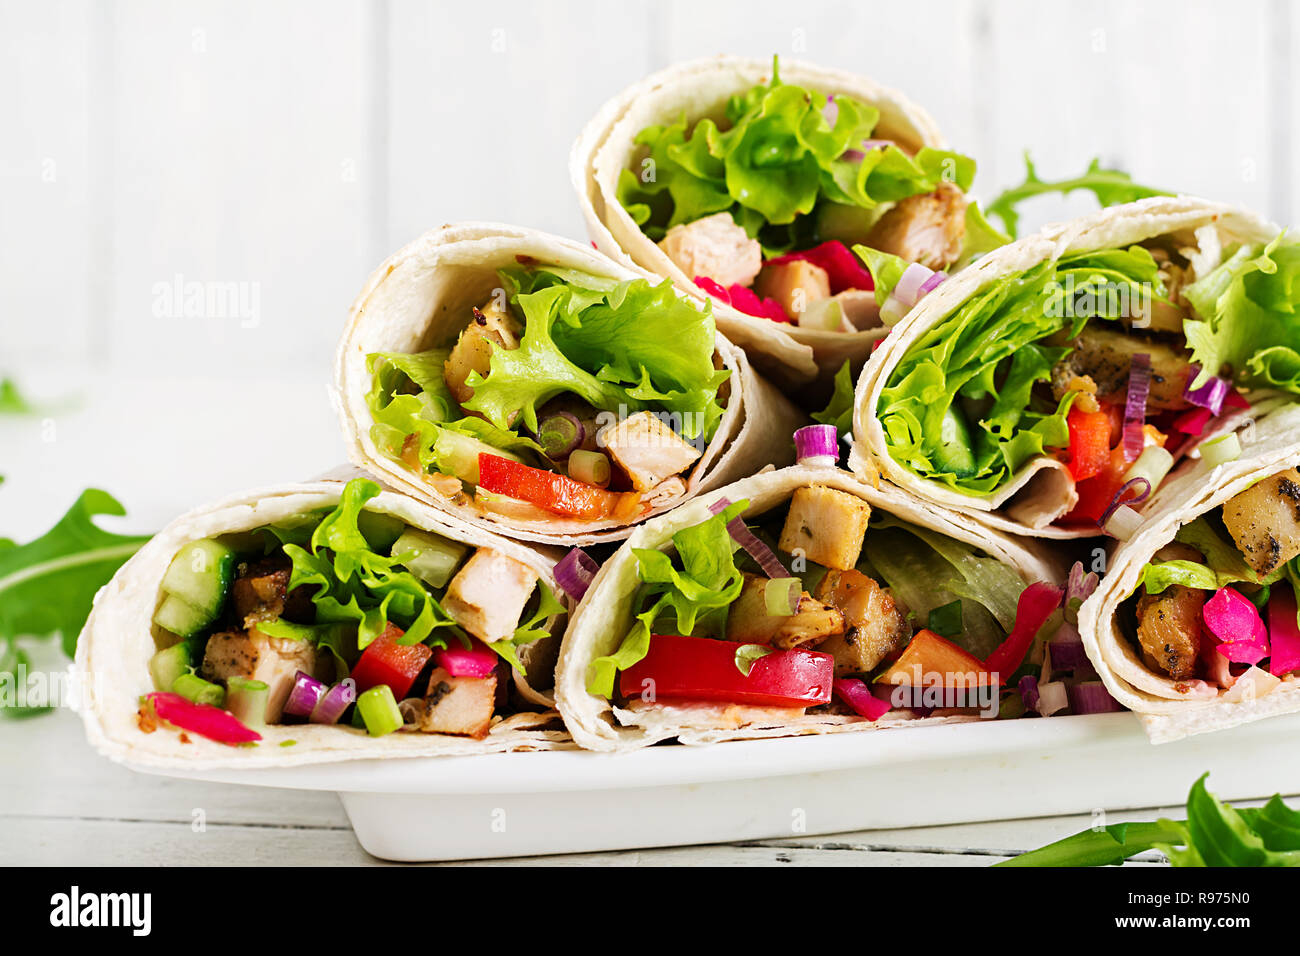 Chicken burrito. Healthy lunch.  Mexican street food fajita tortilla wraps with grilled  chicken fillet and fresh vegetables. Stock Photo